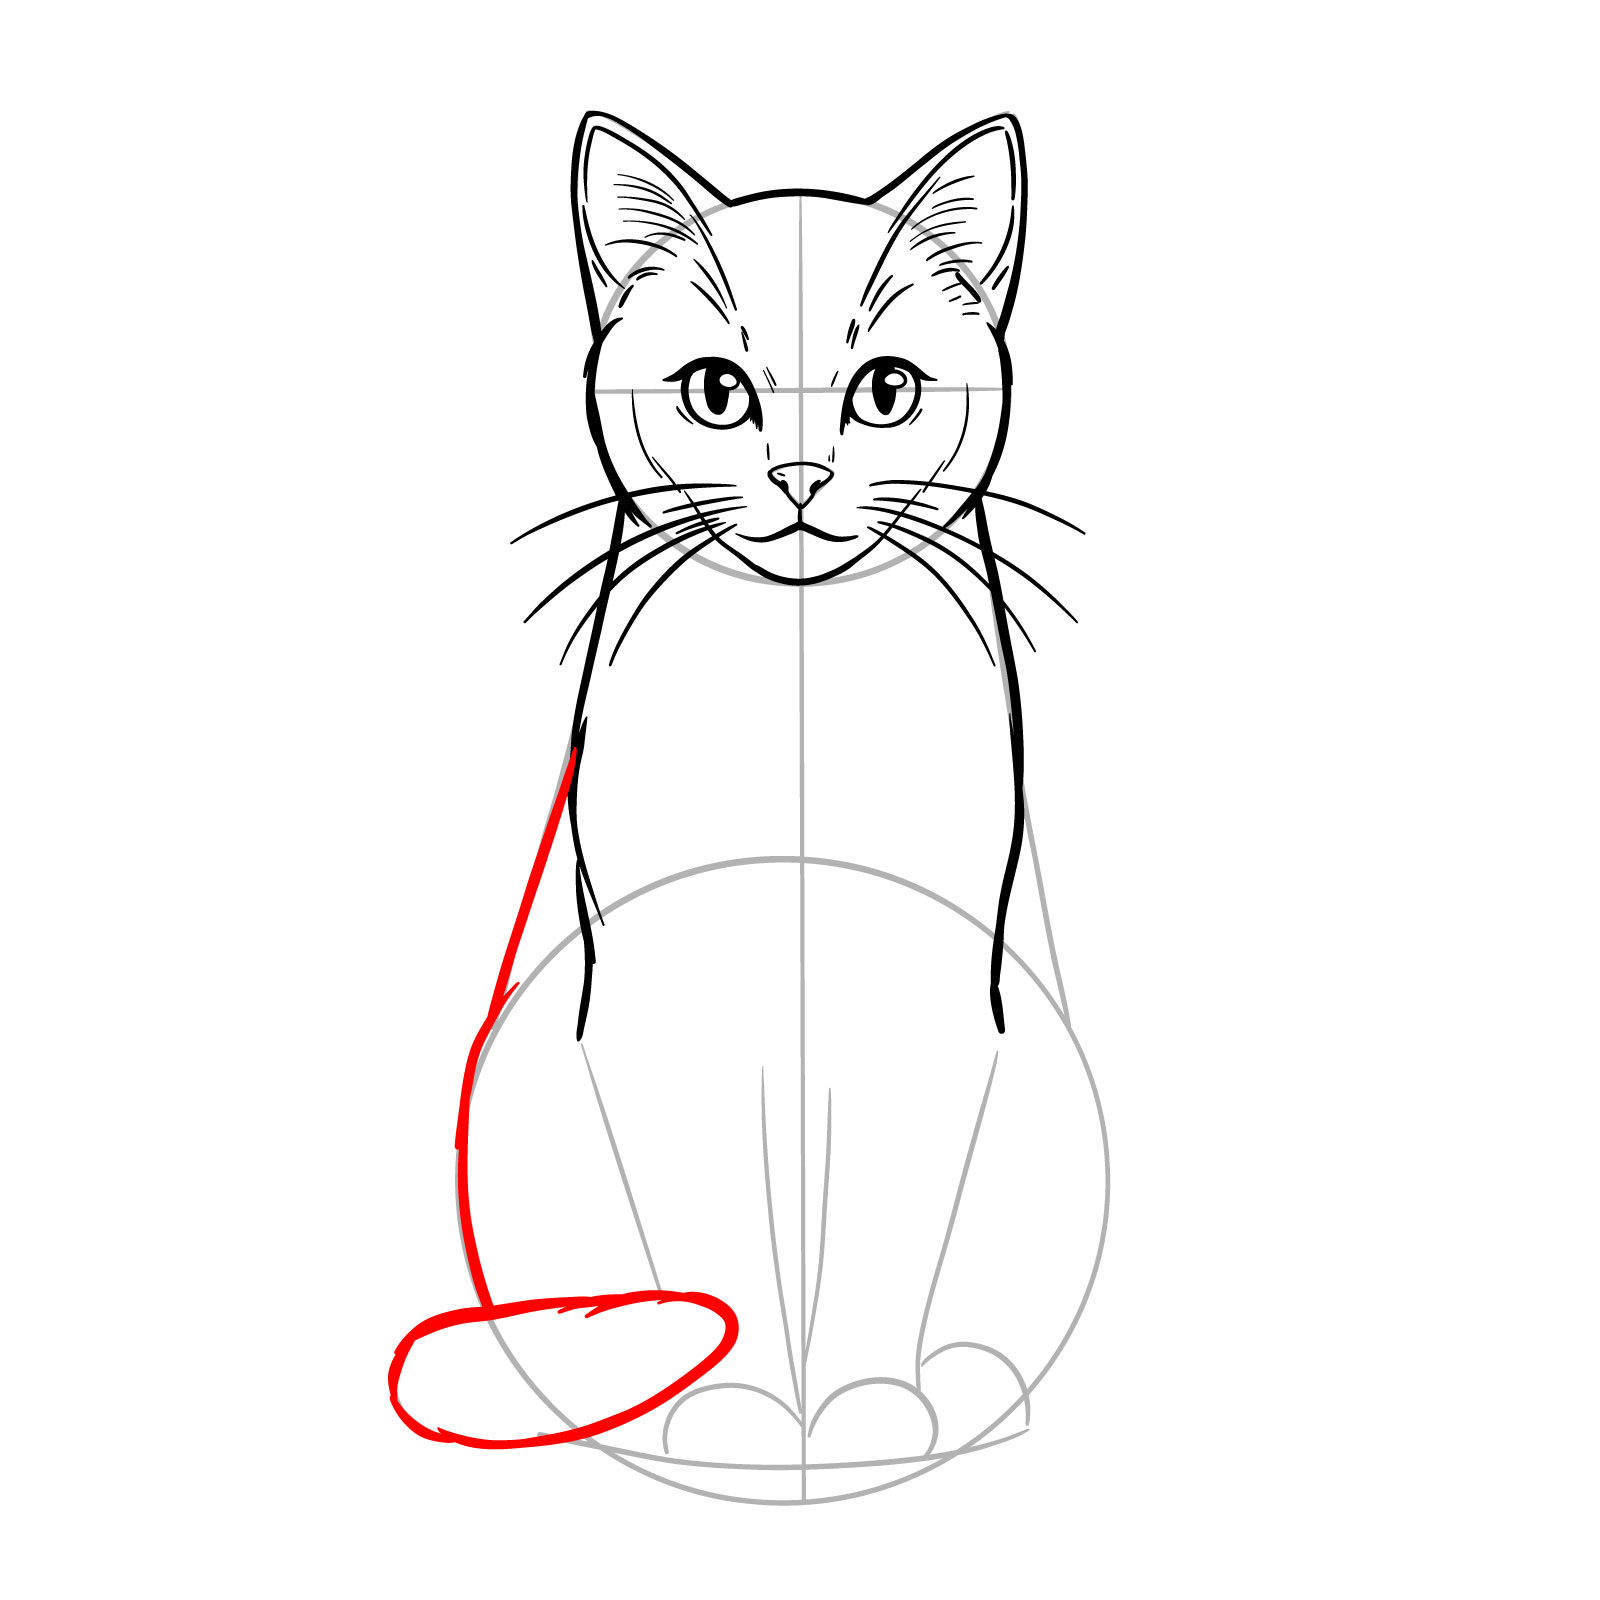 Finalizing the side body and tail outlines for a sitting cat drawing - step 12